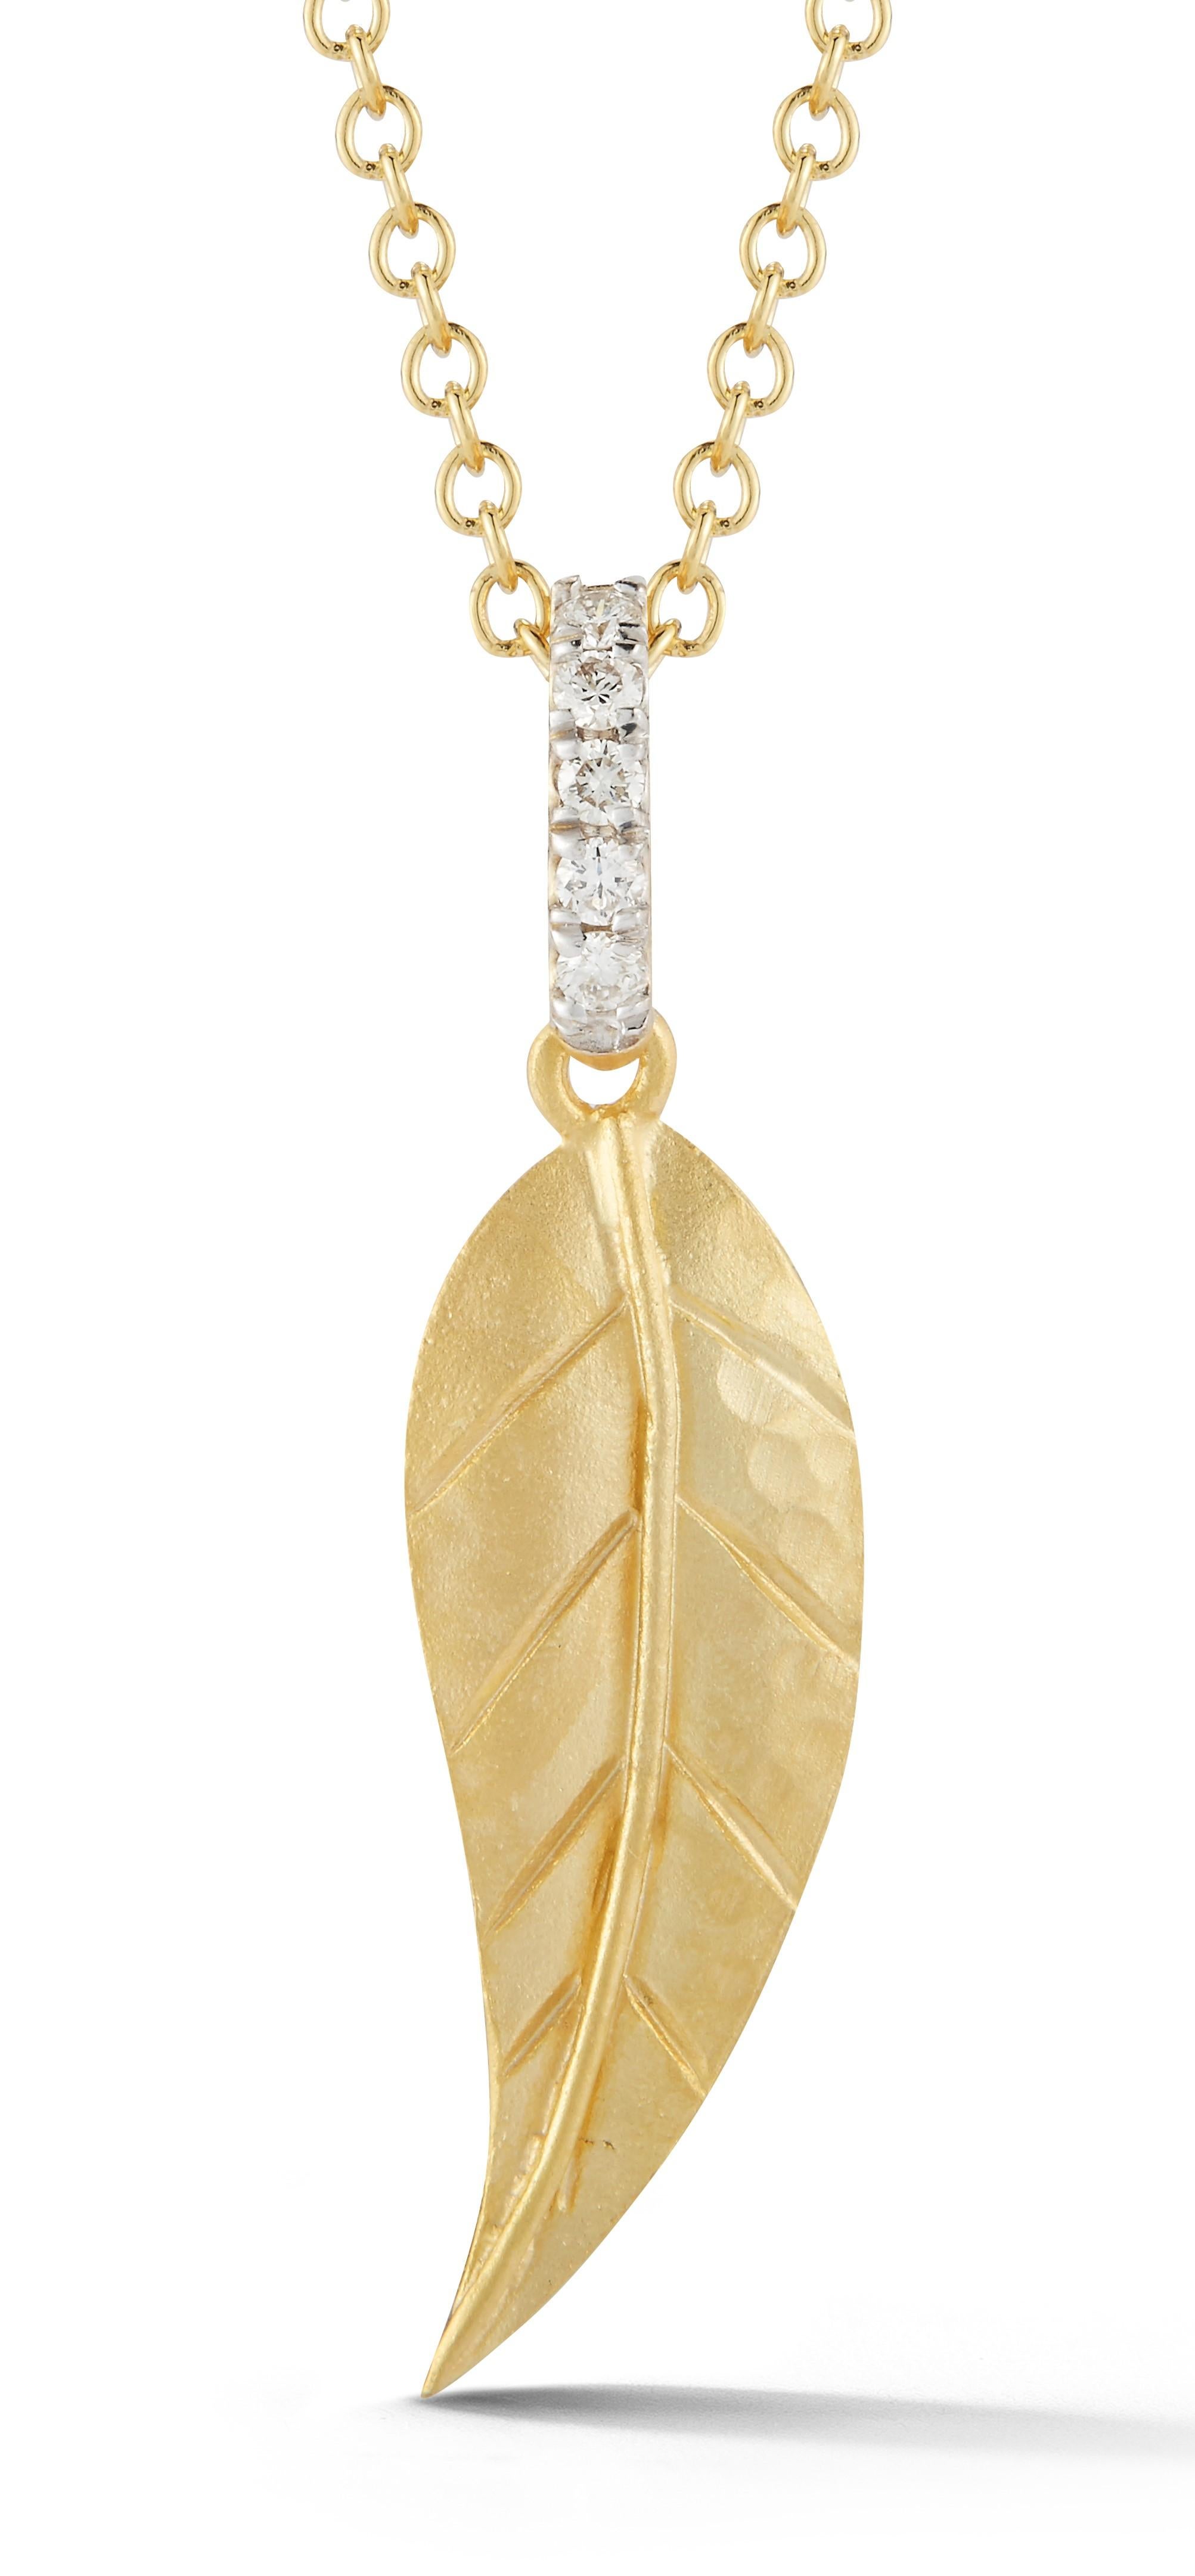 14 Karat Yellow Gold Hand-Crafted Matte-Finish Dainty Leaf Pendant, Enhanced with 0.037 Carats of a Pave Set Diamond Bale, Sliding on a 16